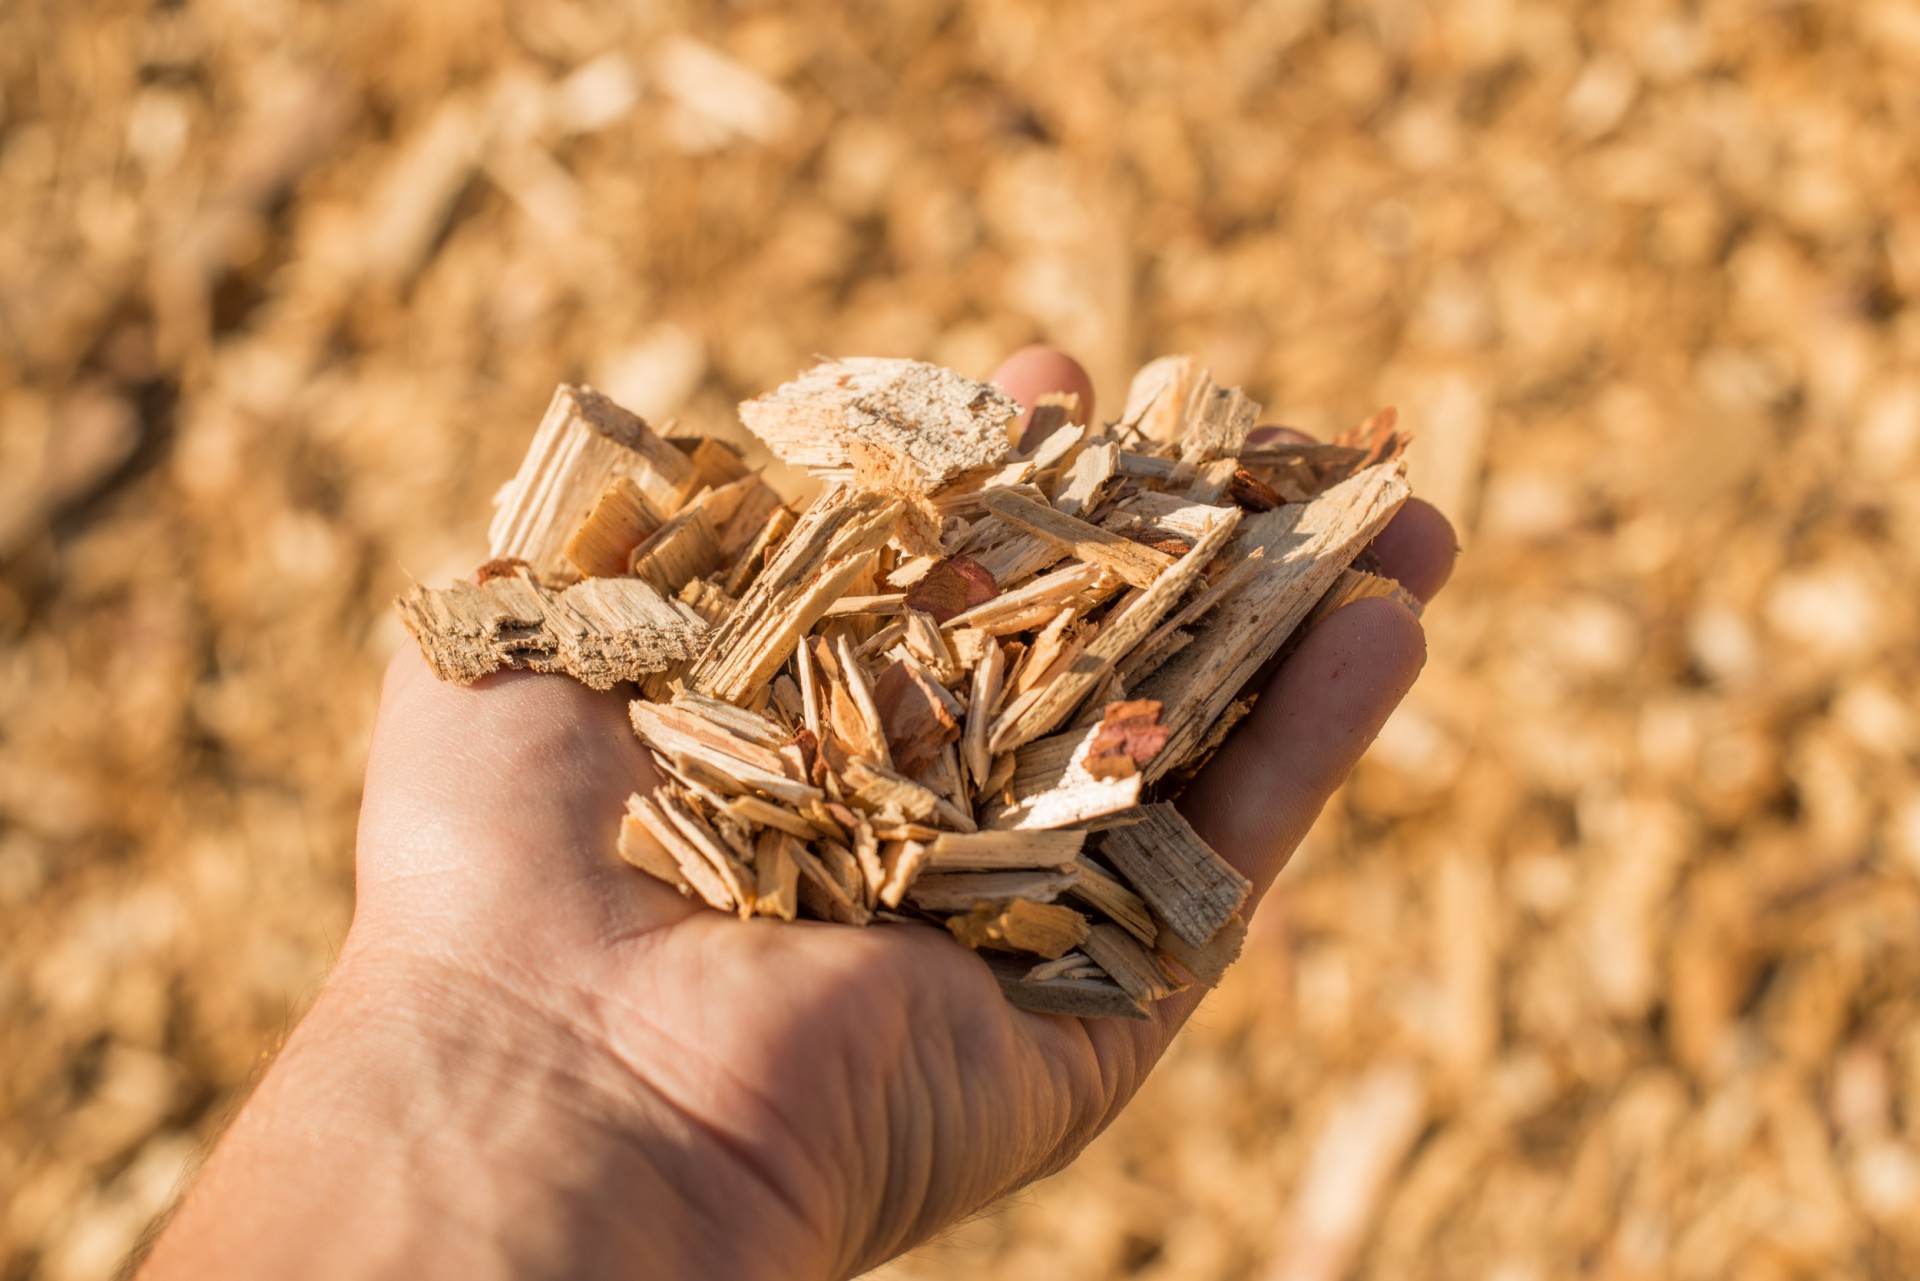 Wood chips allow for clean burning.